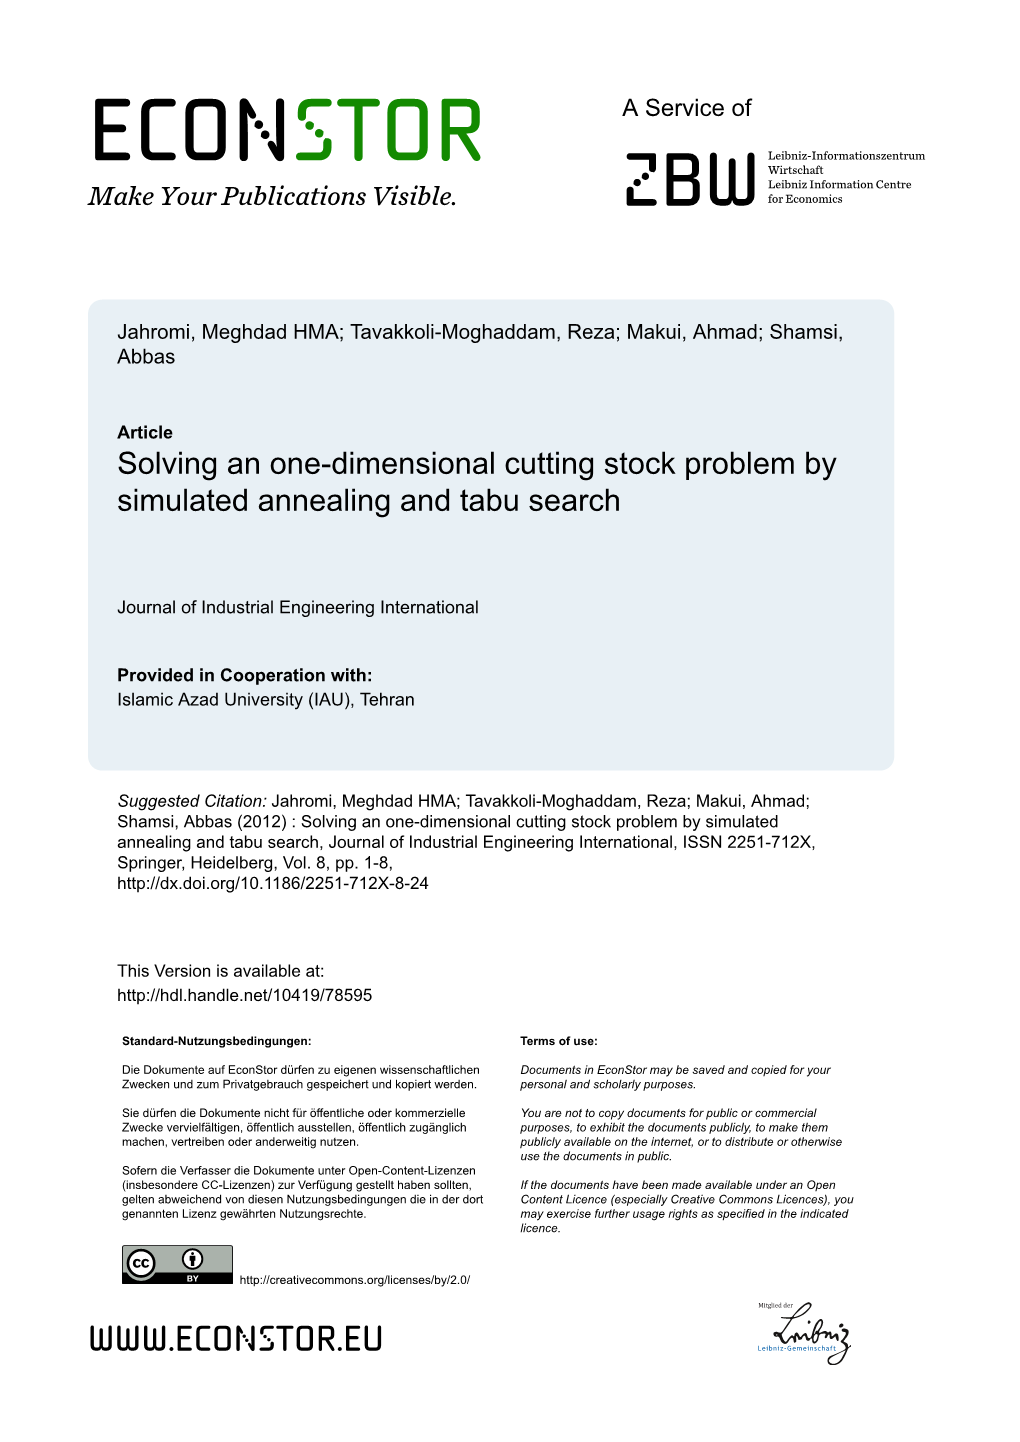 Solving an One-Dimensional Cutting Stock Problem by Simulated Annealing and Tabu Search